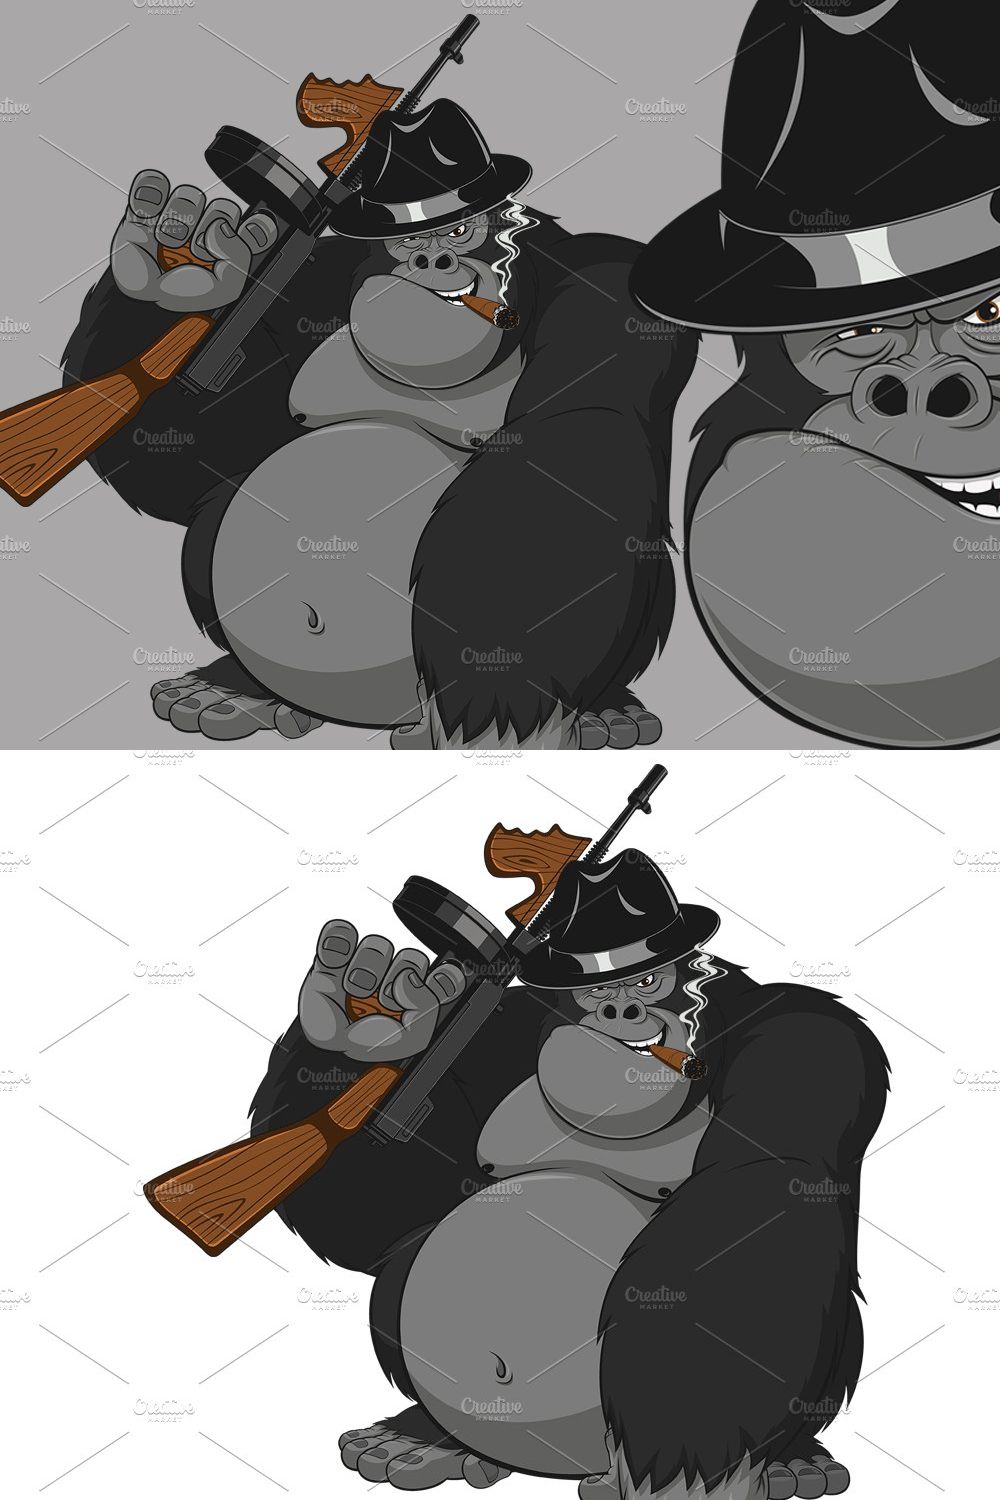 Monkey with guns pinterest preview image.